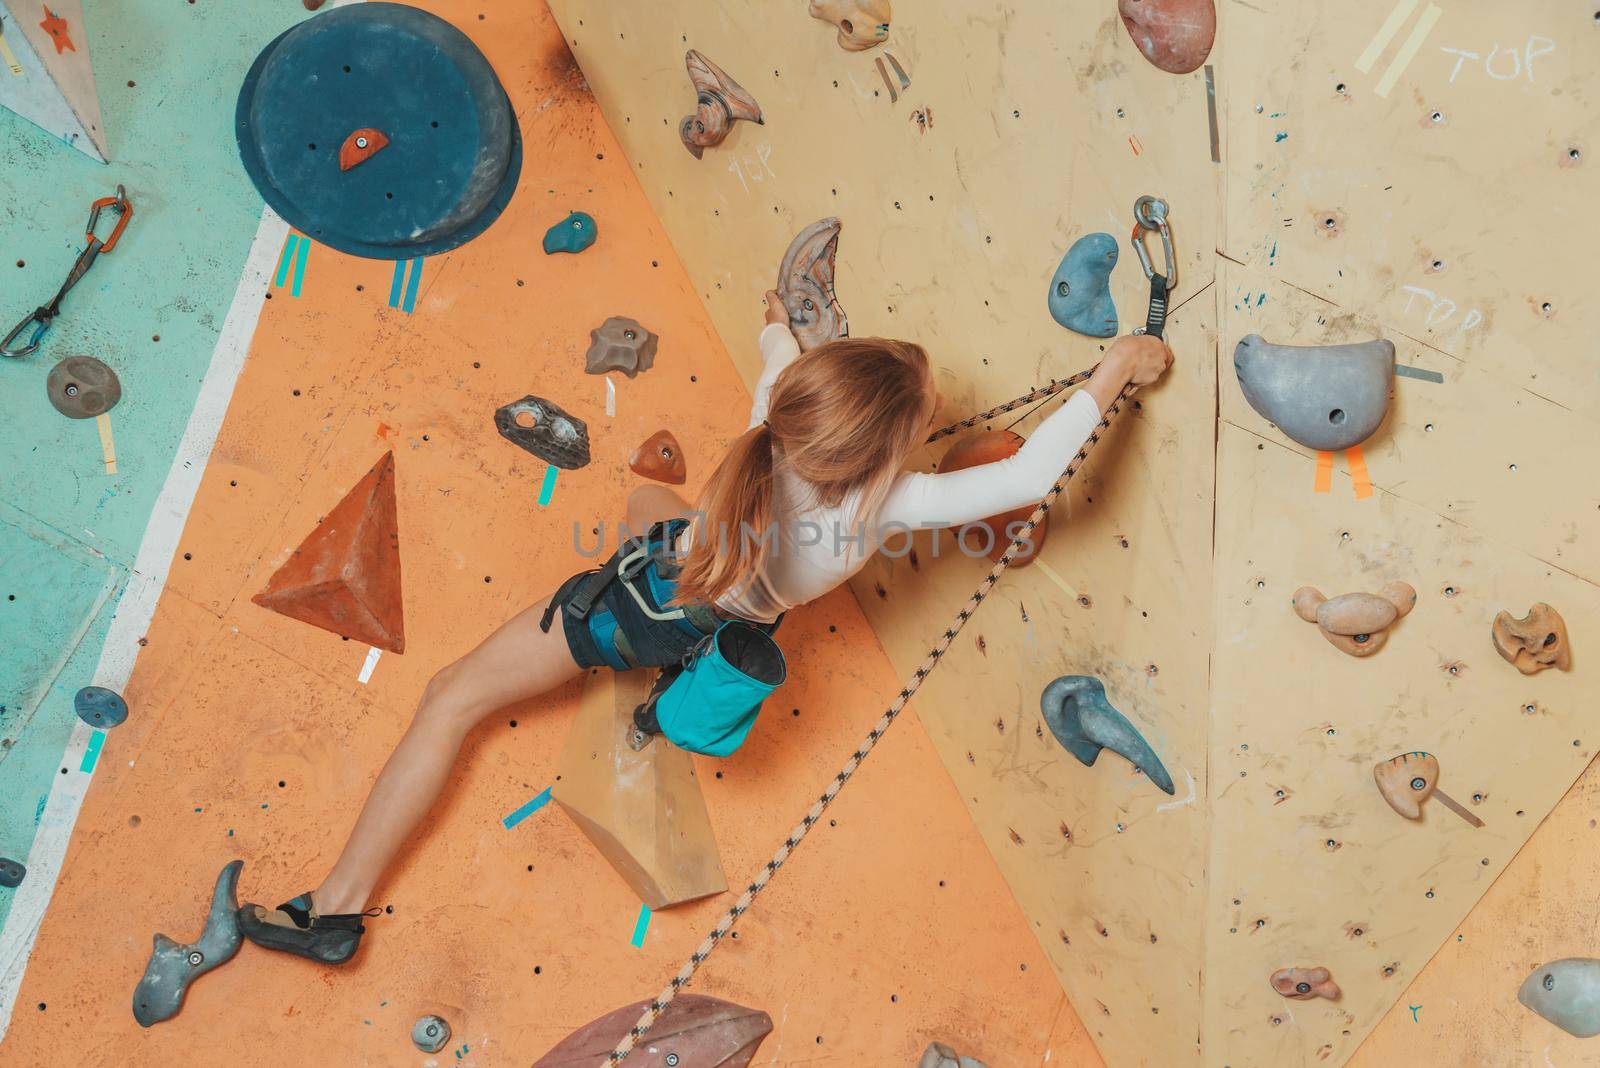 Teen girl climbing on artificial boulders of rock wall with safety harness. Girl inserting the rope in a quickdraw